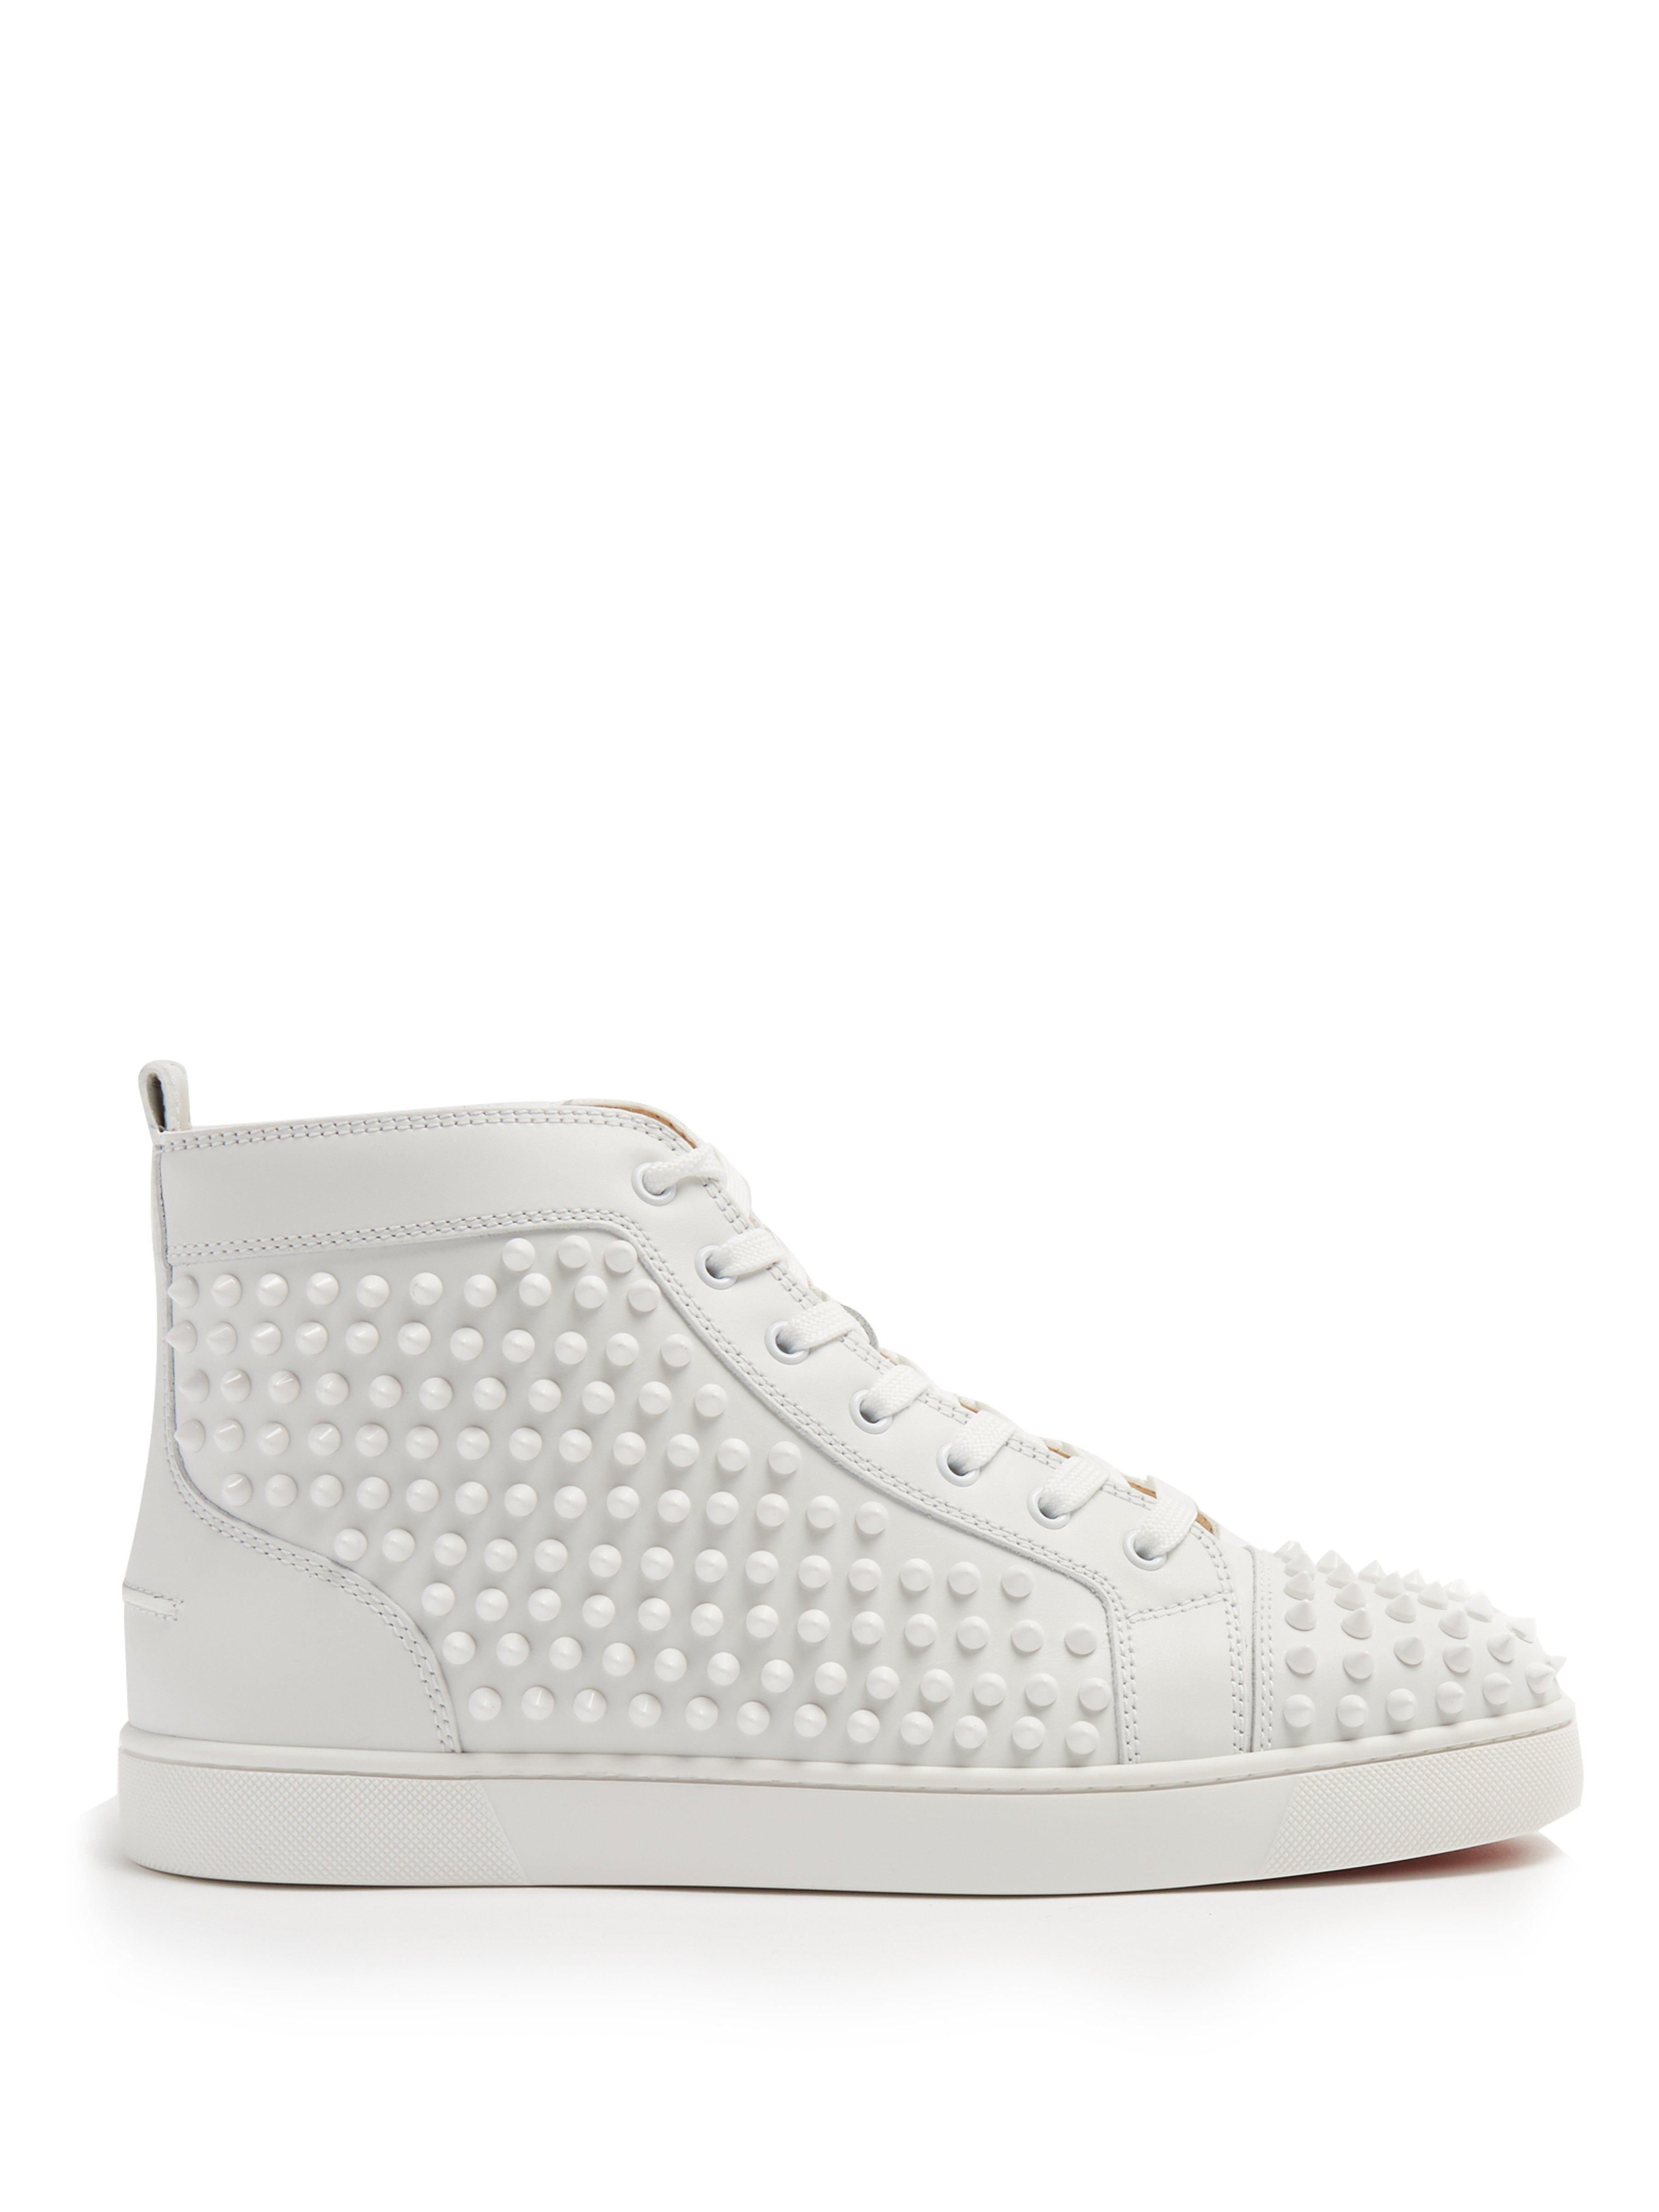 Christian Louboutin Louis Spiked Leather Sneakrs in White for Men - Lyst